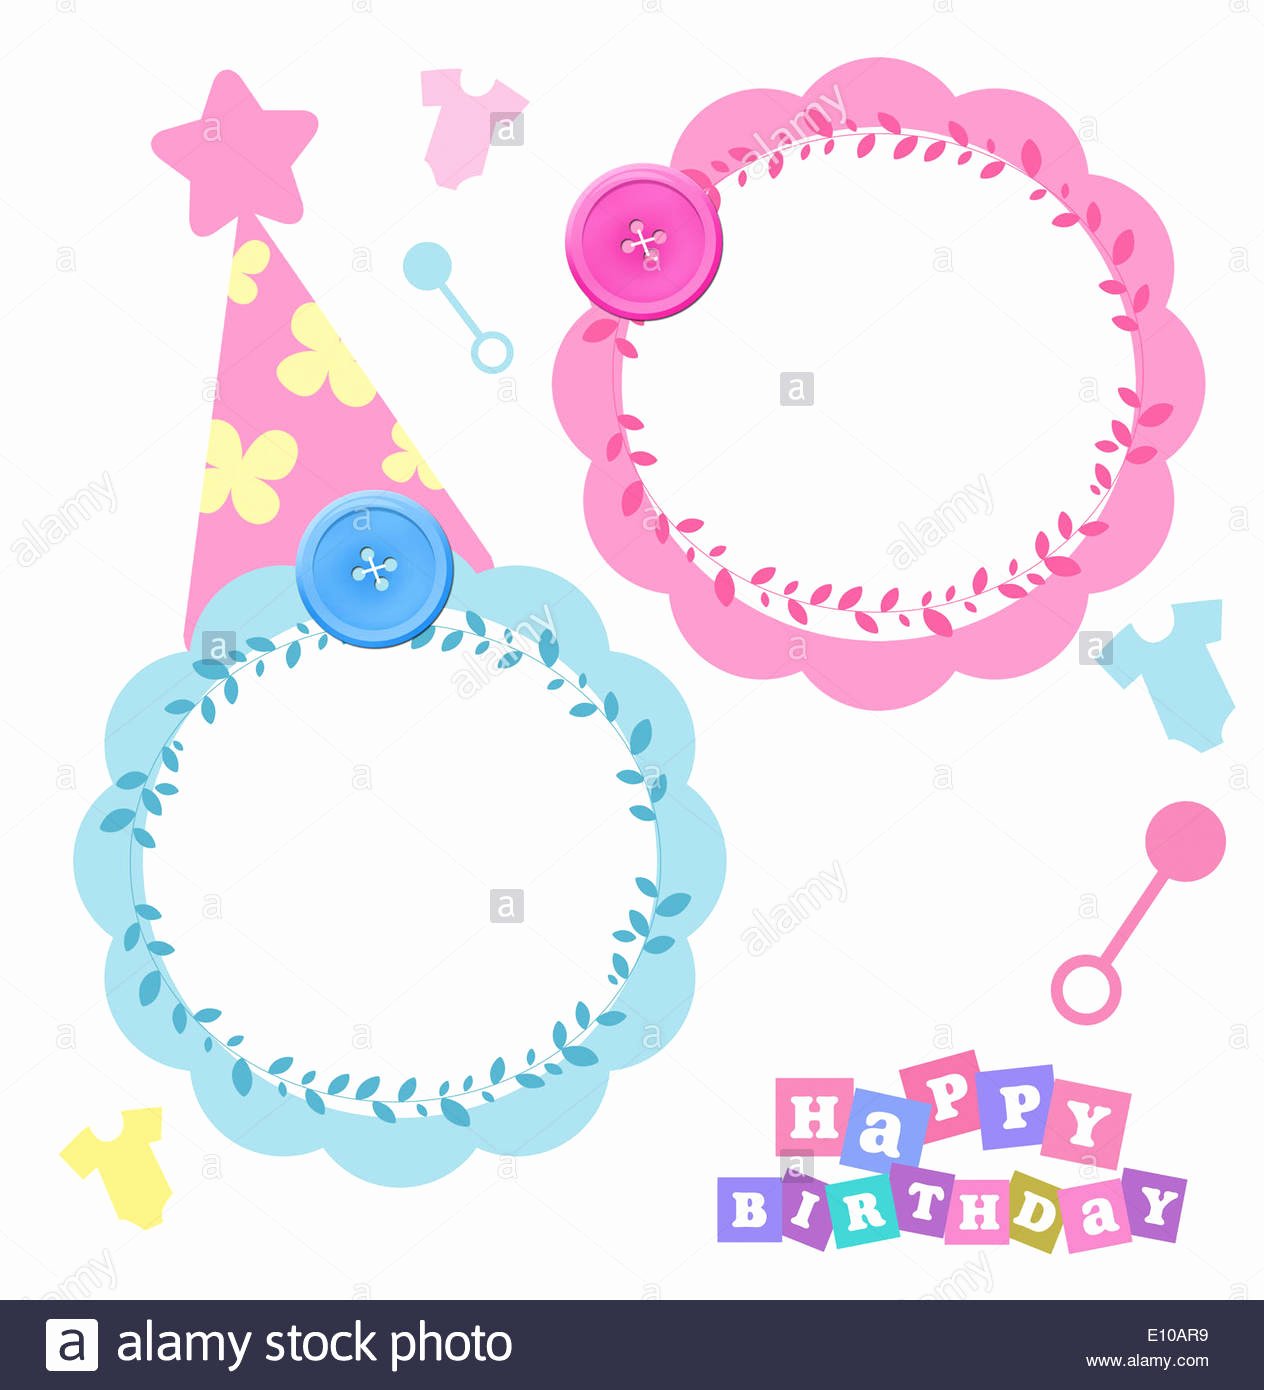 First Birthday Board Template Best Of A Card Template Wishing Happy First Birthday Stock